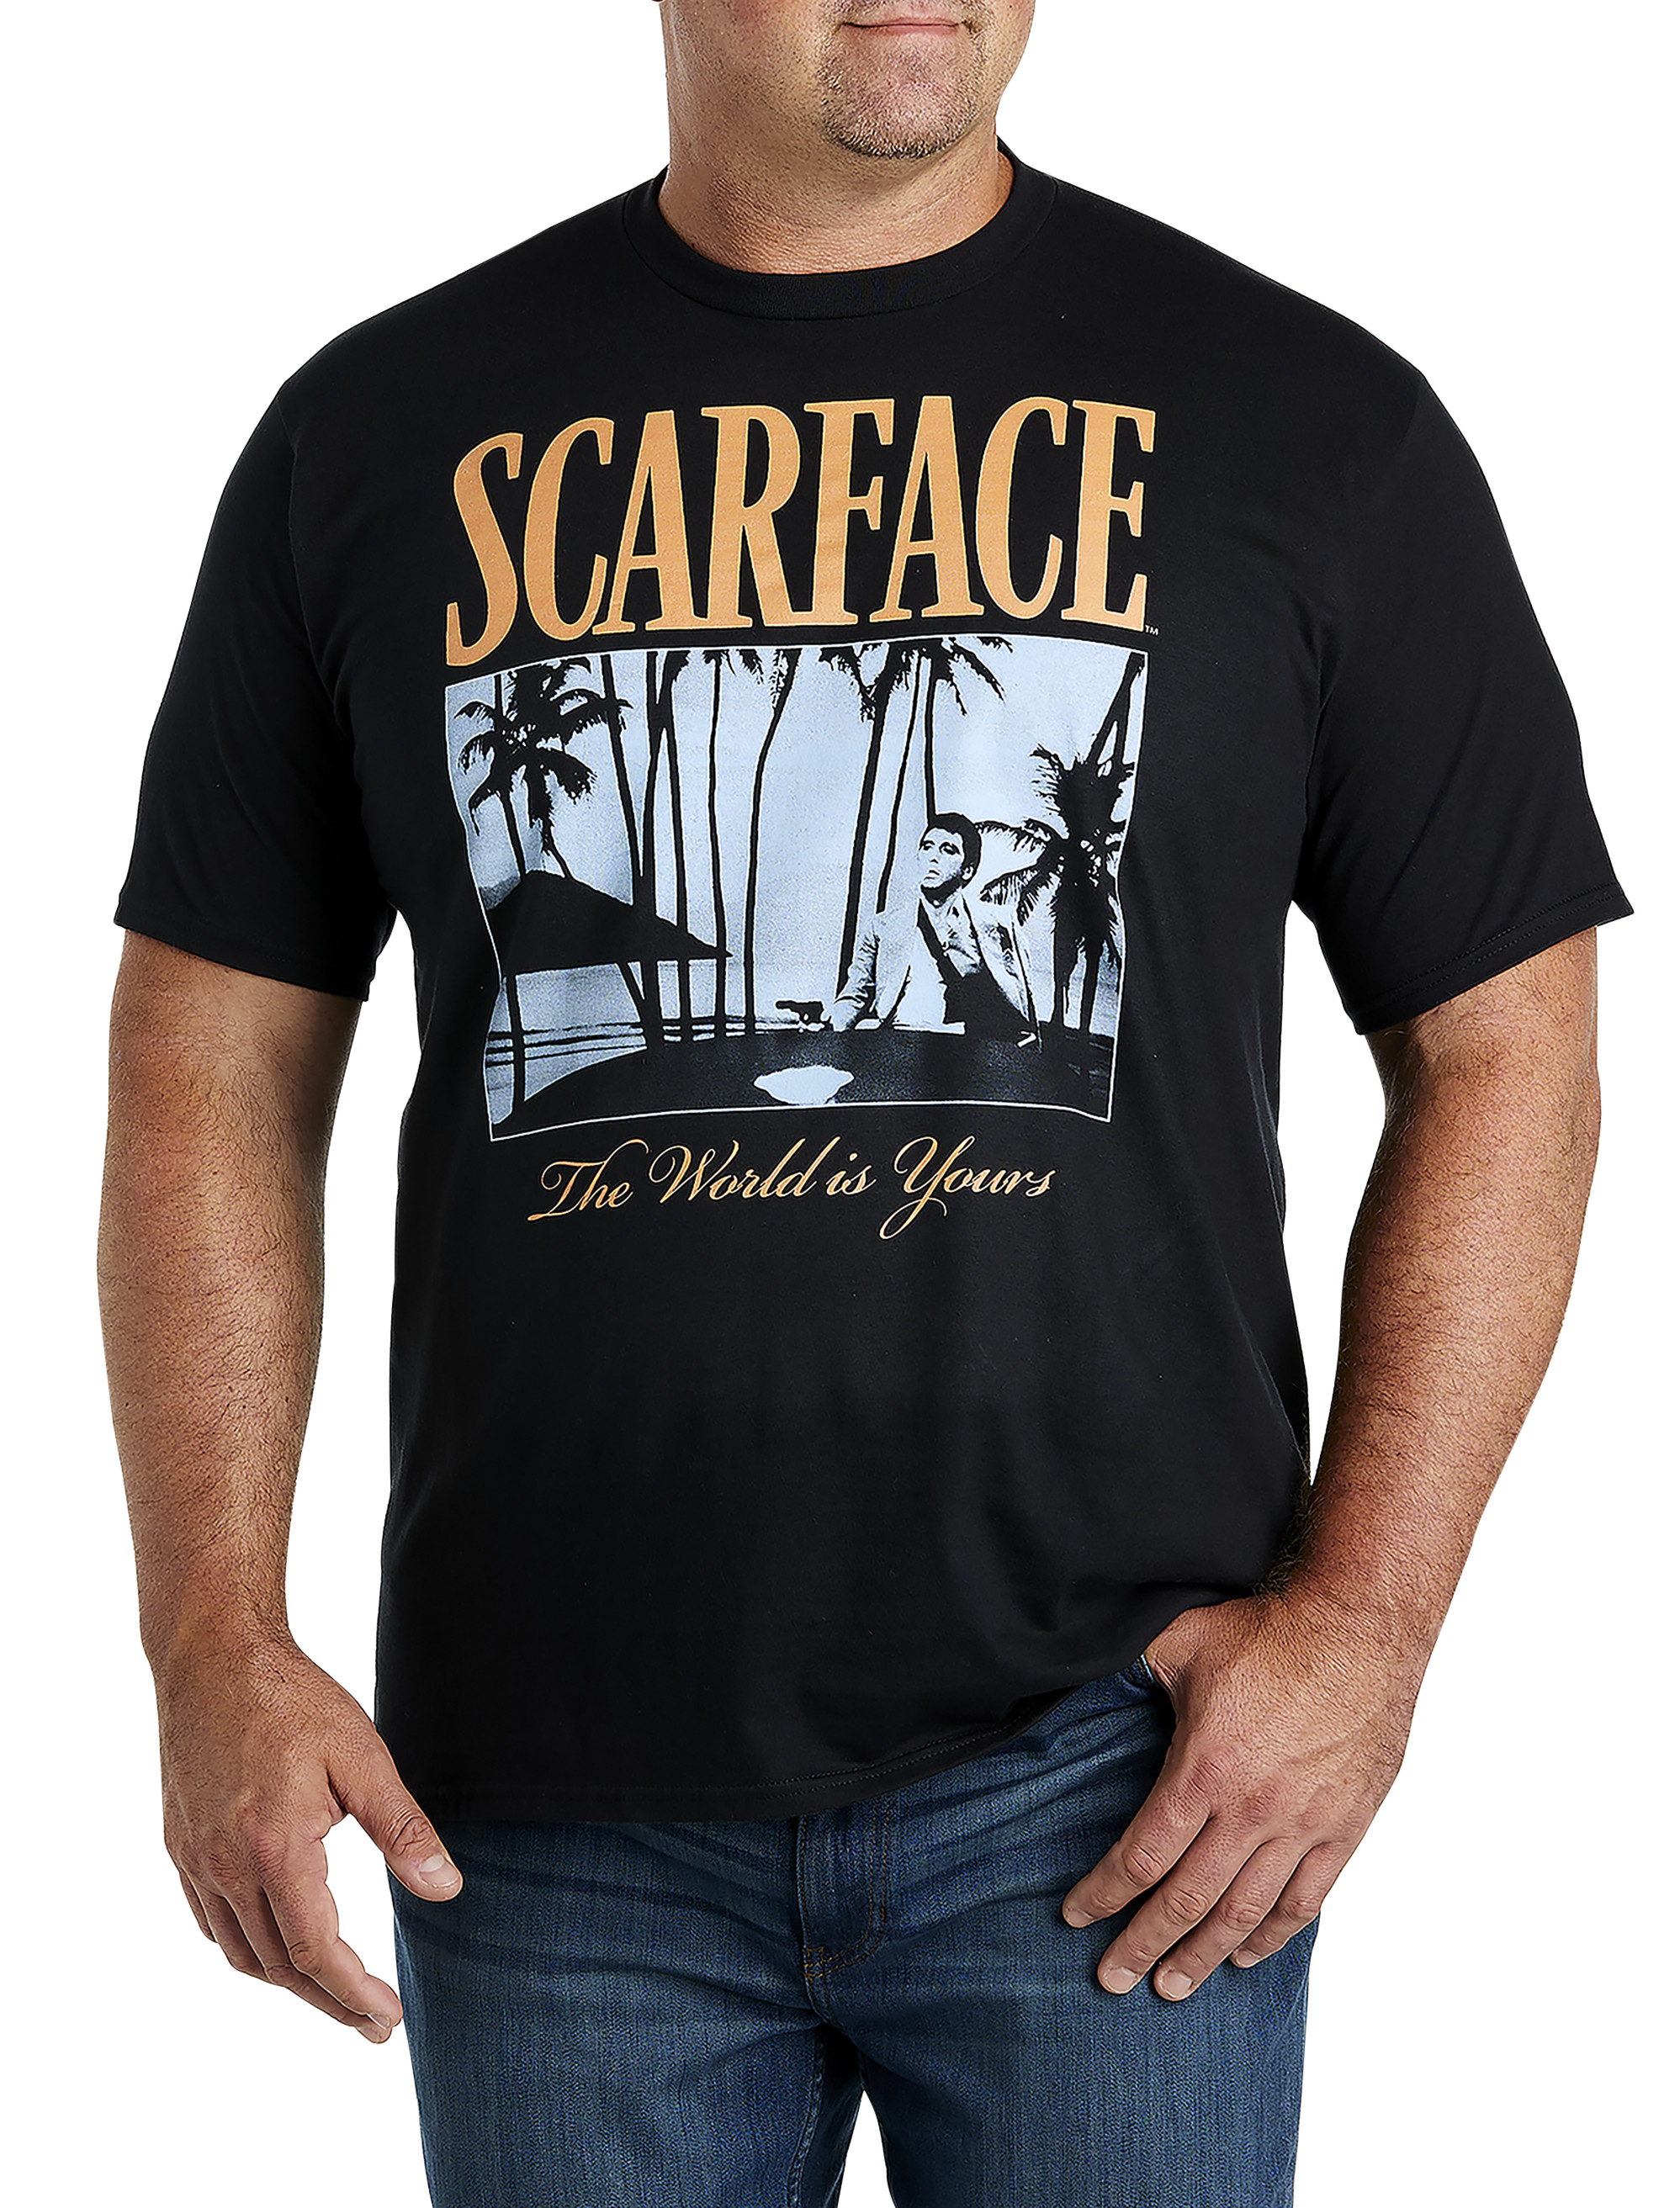 Scarface The World is Yours Graphic Tee